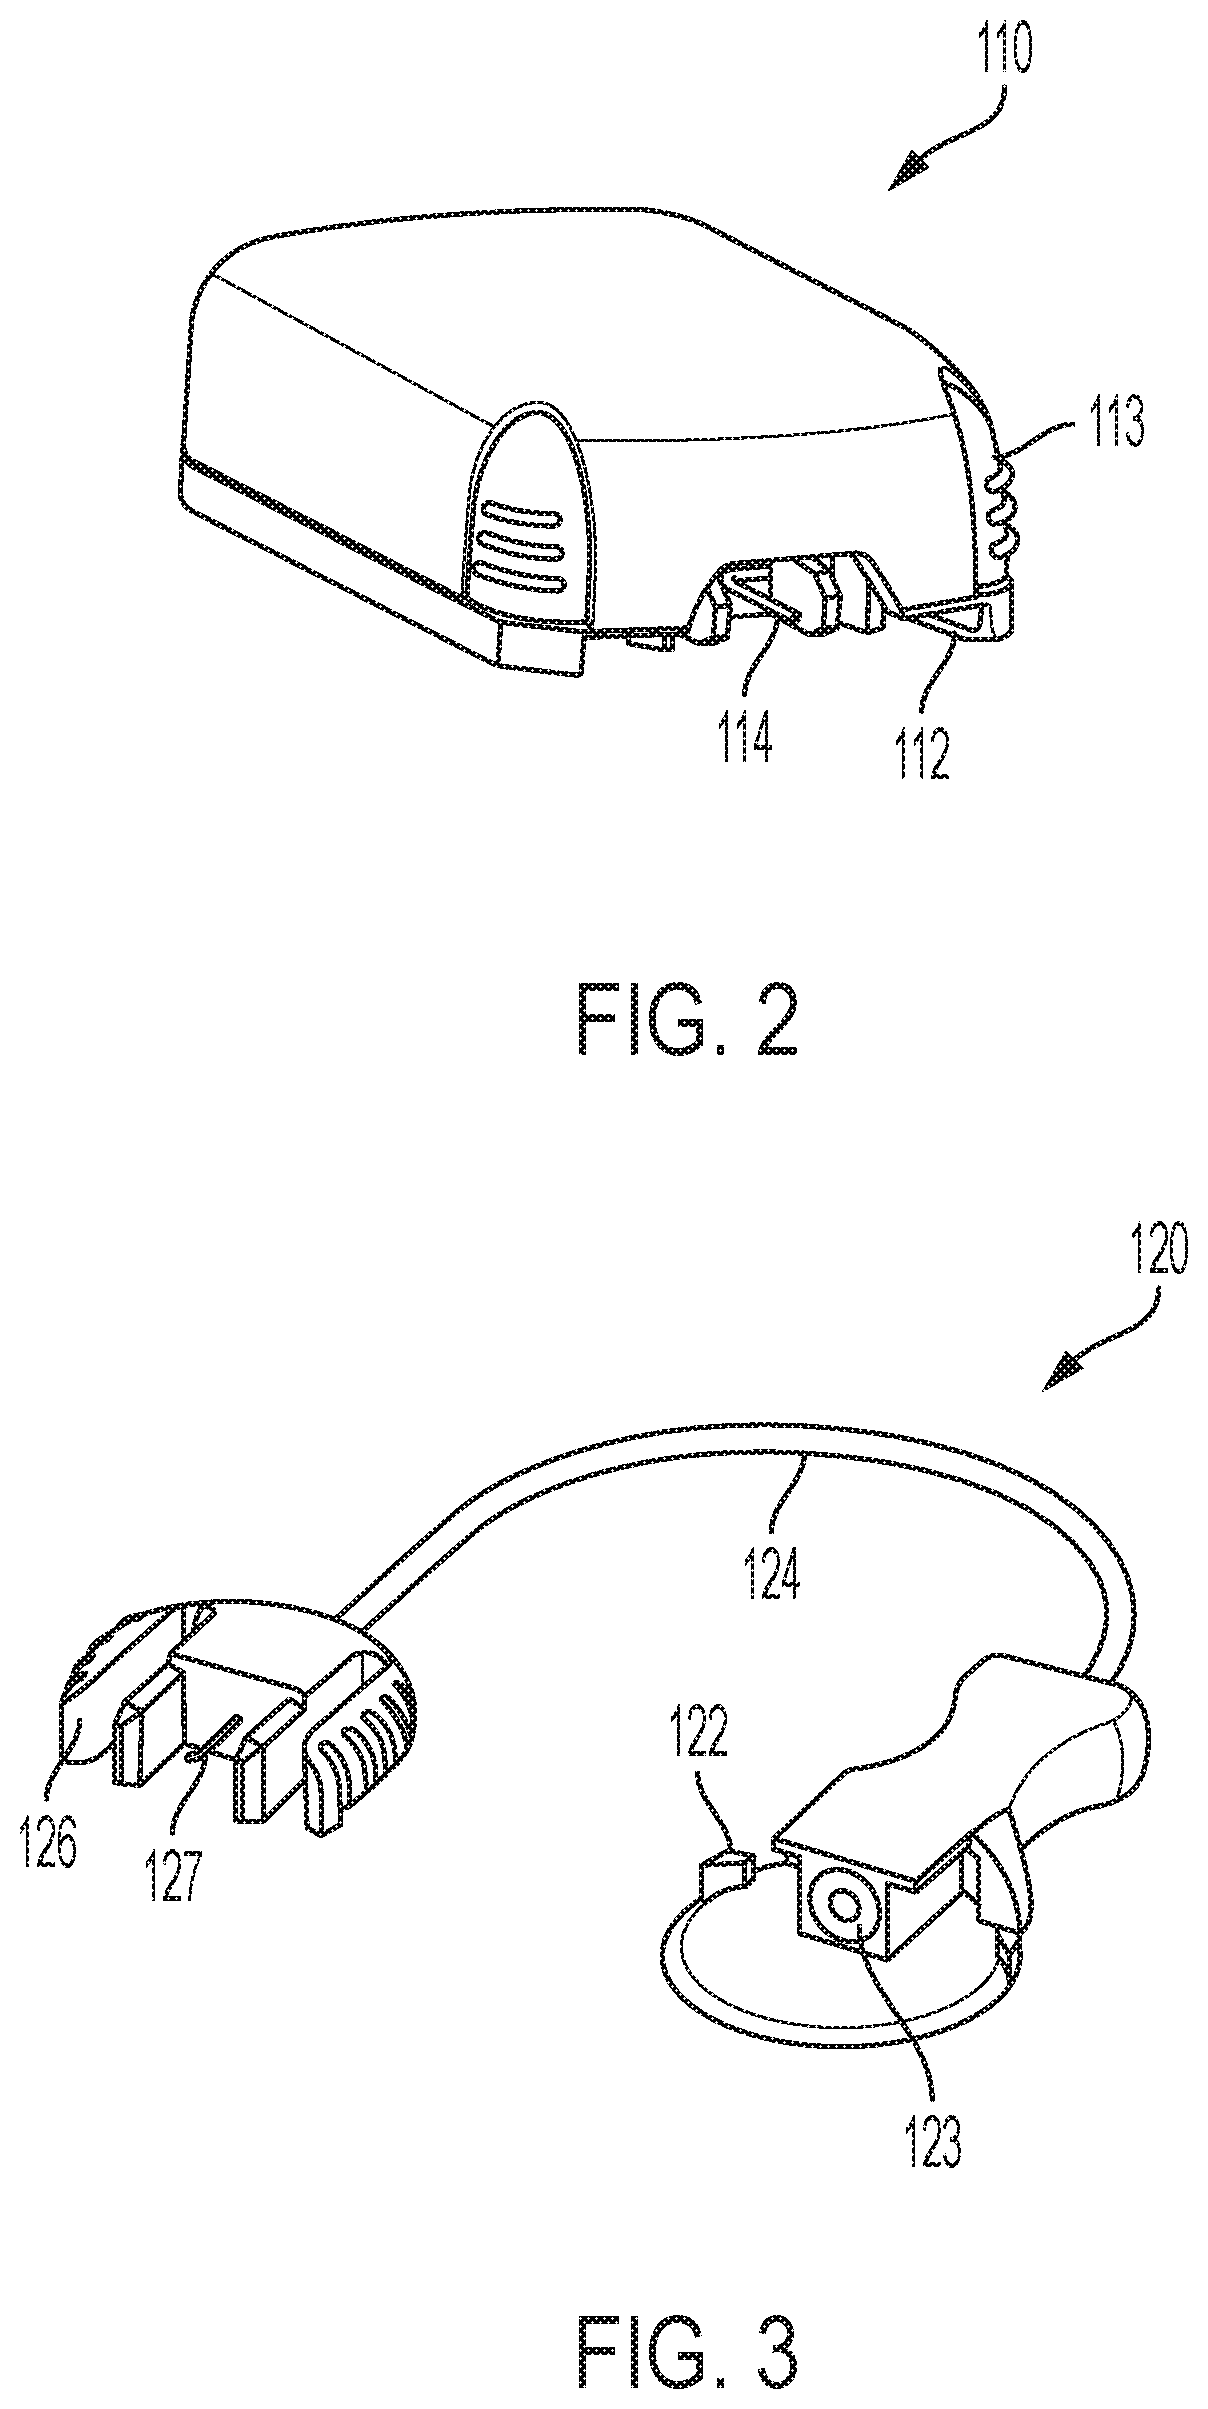 Integrated inserter/applicator for a drug delivery system providing multiple wear configurations